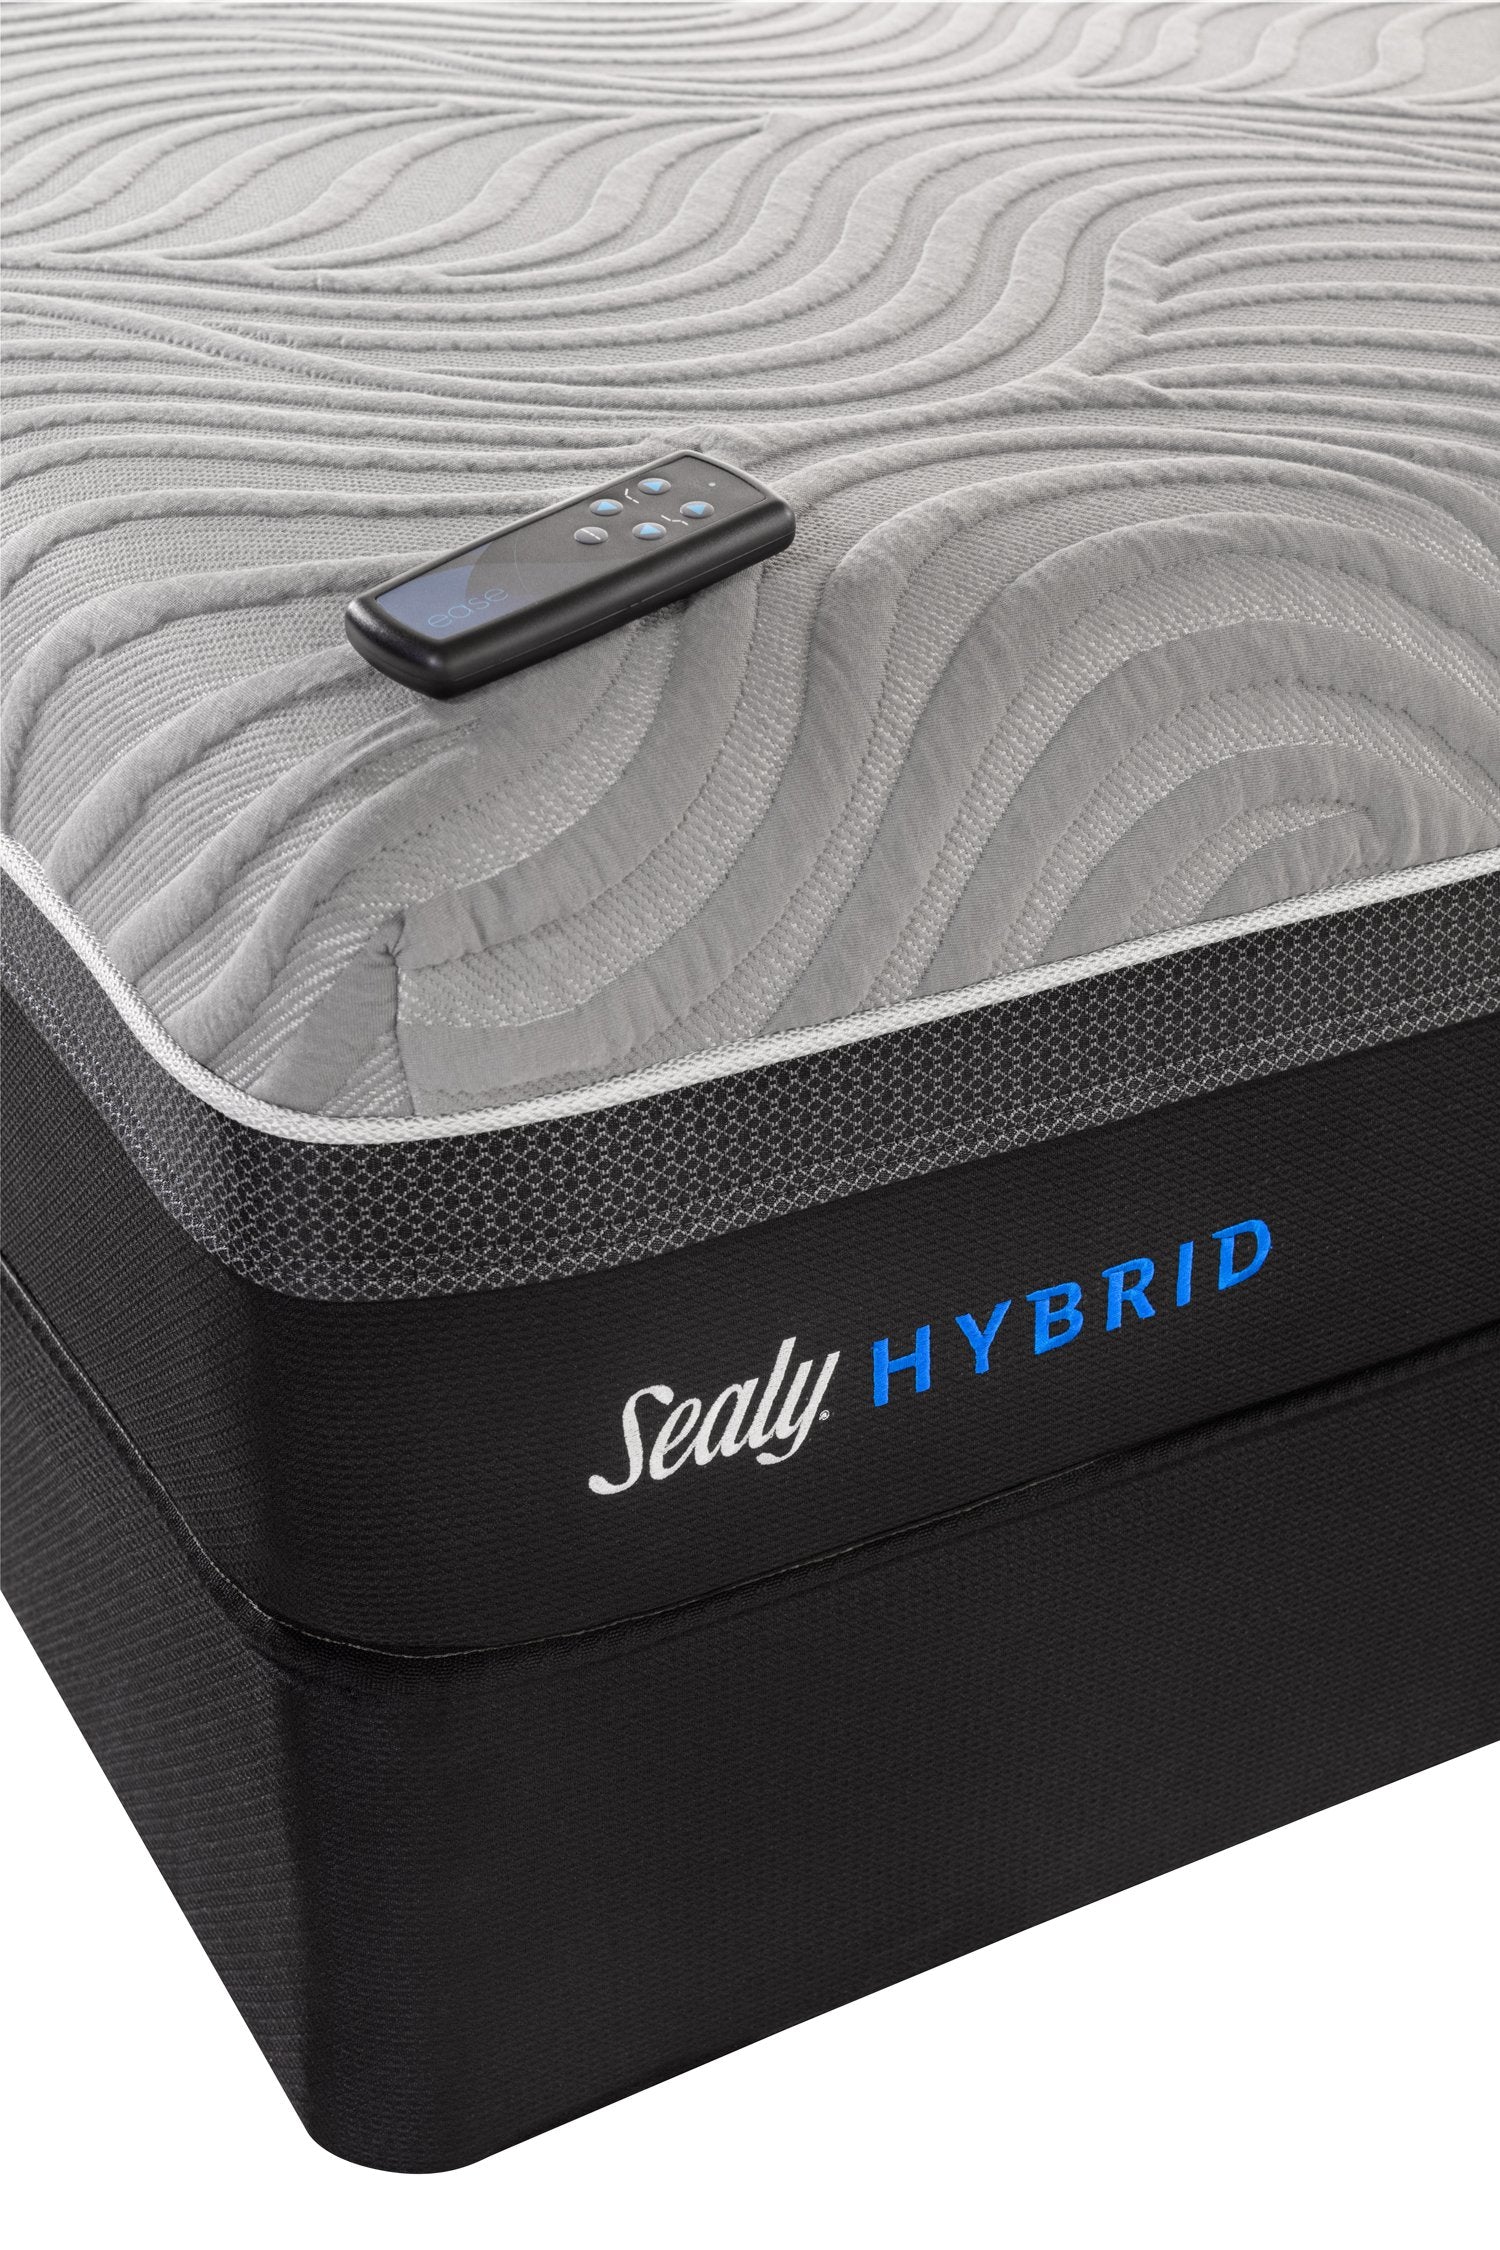 Sealy Posturepedic Hybrid Performance Copper II Firm Mattress with Remote